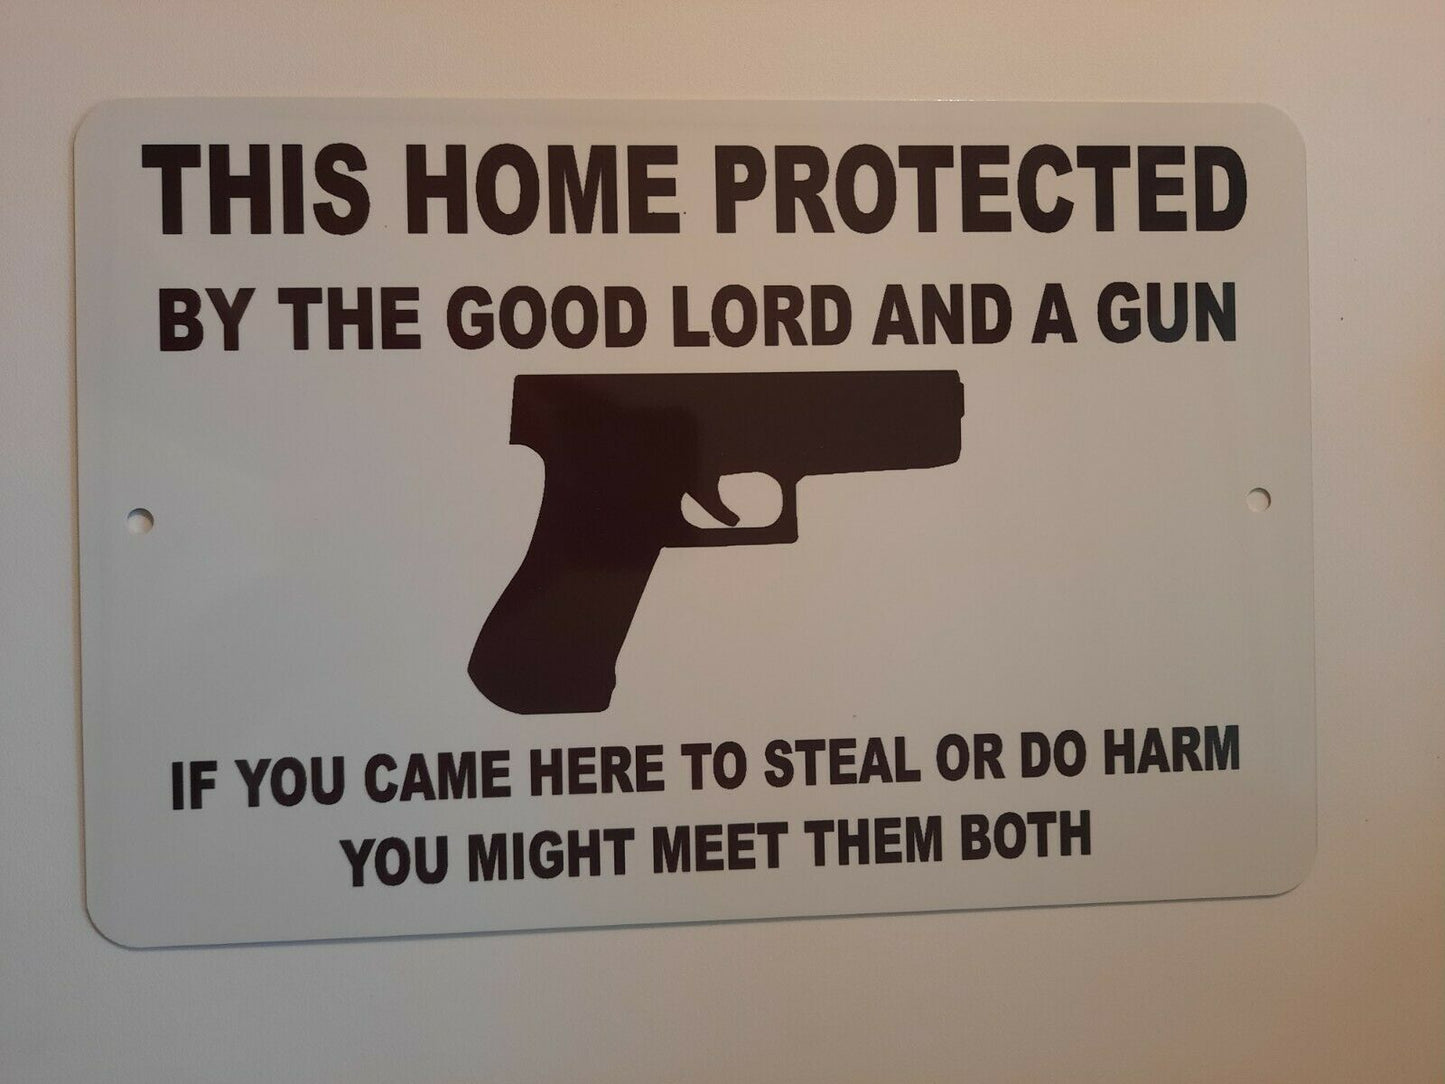 Home Protected by the Good Lord and a Gun 8x12 Metal Wall Warning Sign